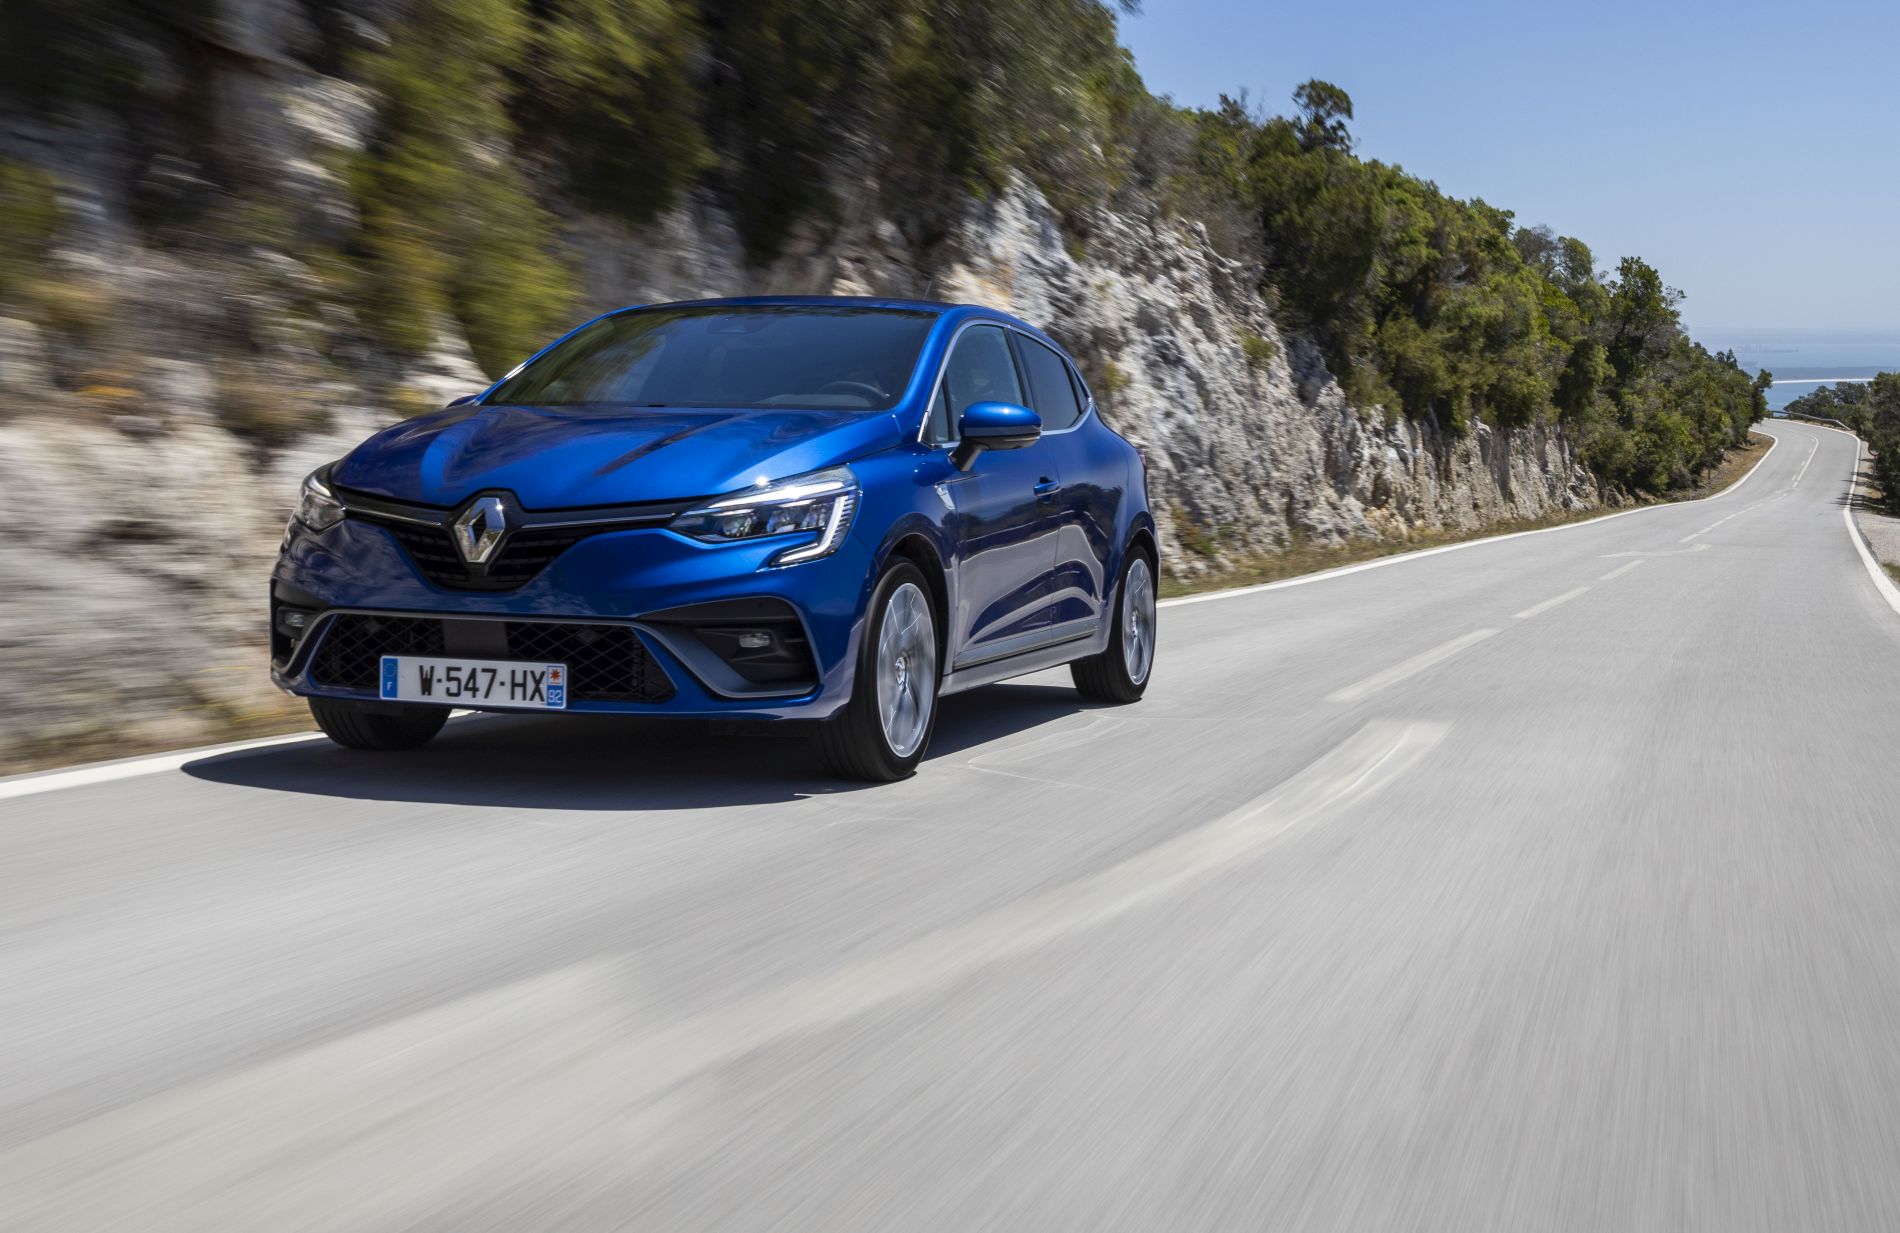 All-new Renault Clio R.S. Line – Blue Iron (1)